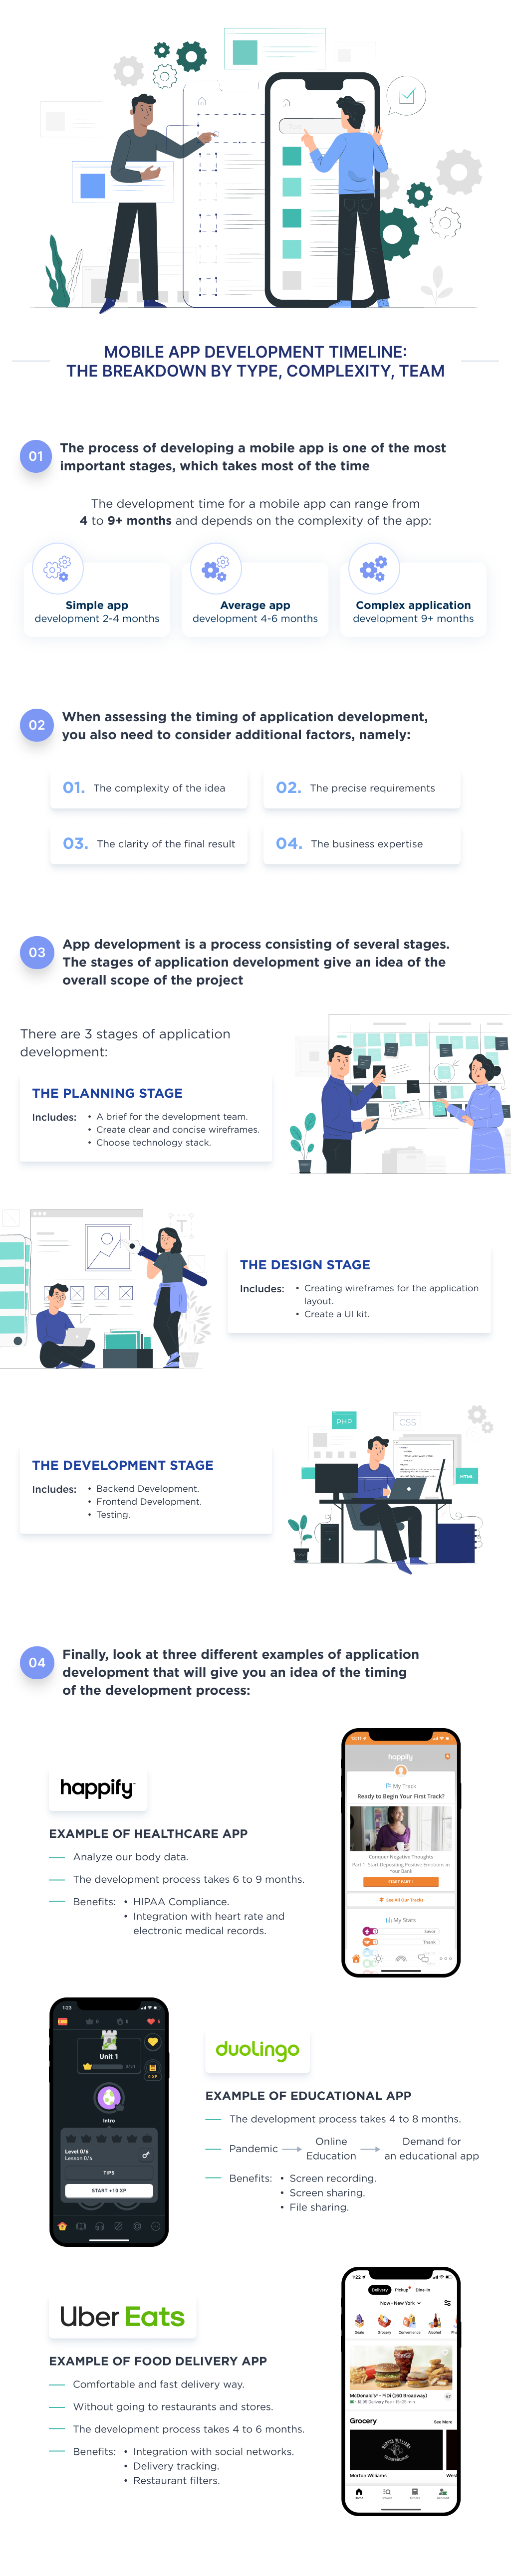 This is an infographic that describes all the necessary steps to calculate the time to develop a mobile app